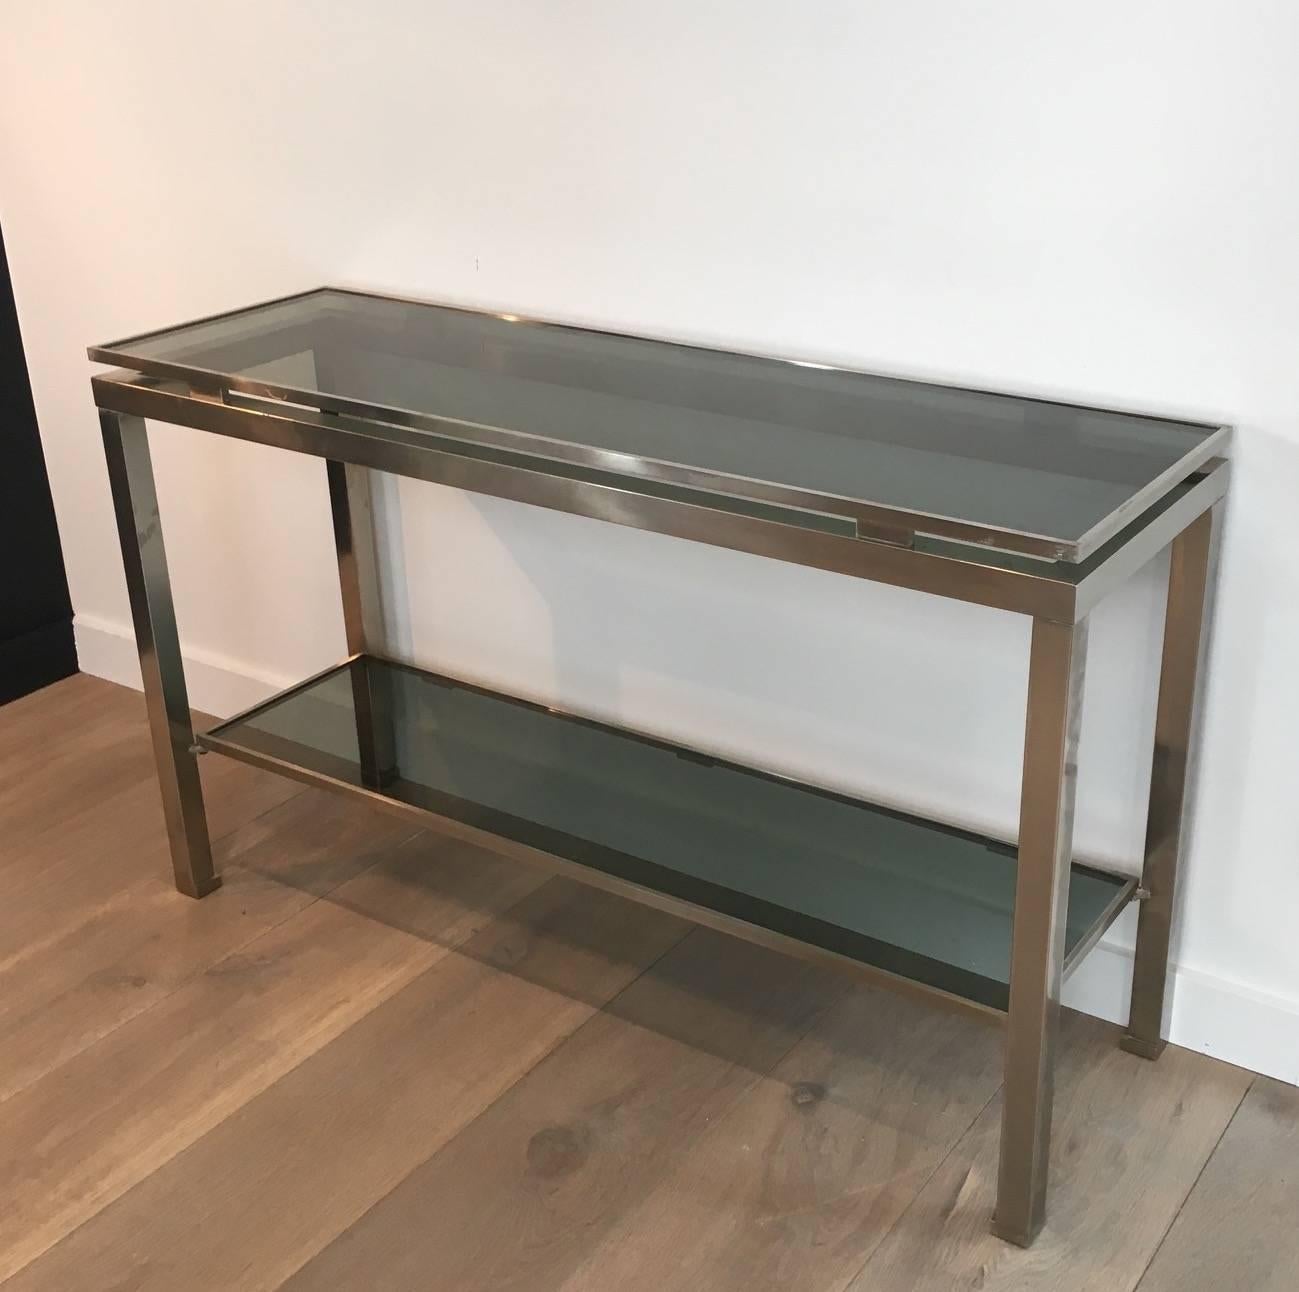 A Mid-Century Modern console made of brushed steel with blue/grey glass shelves. Designed by Guy Lefèvre for Maison Jansen, French, circa 1970s.
 
This console is currently in France, please allow 2 to 4 weeks delivery to New York. Shipping cost